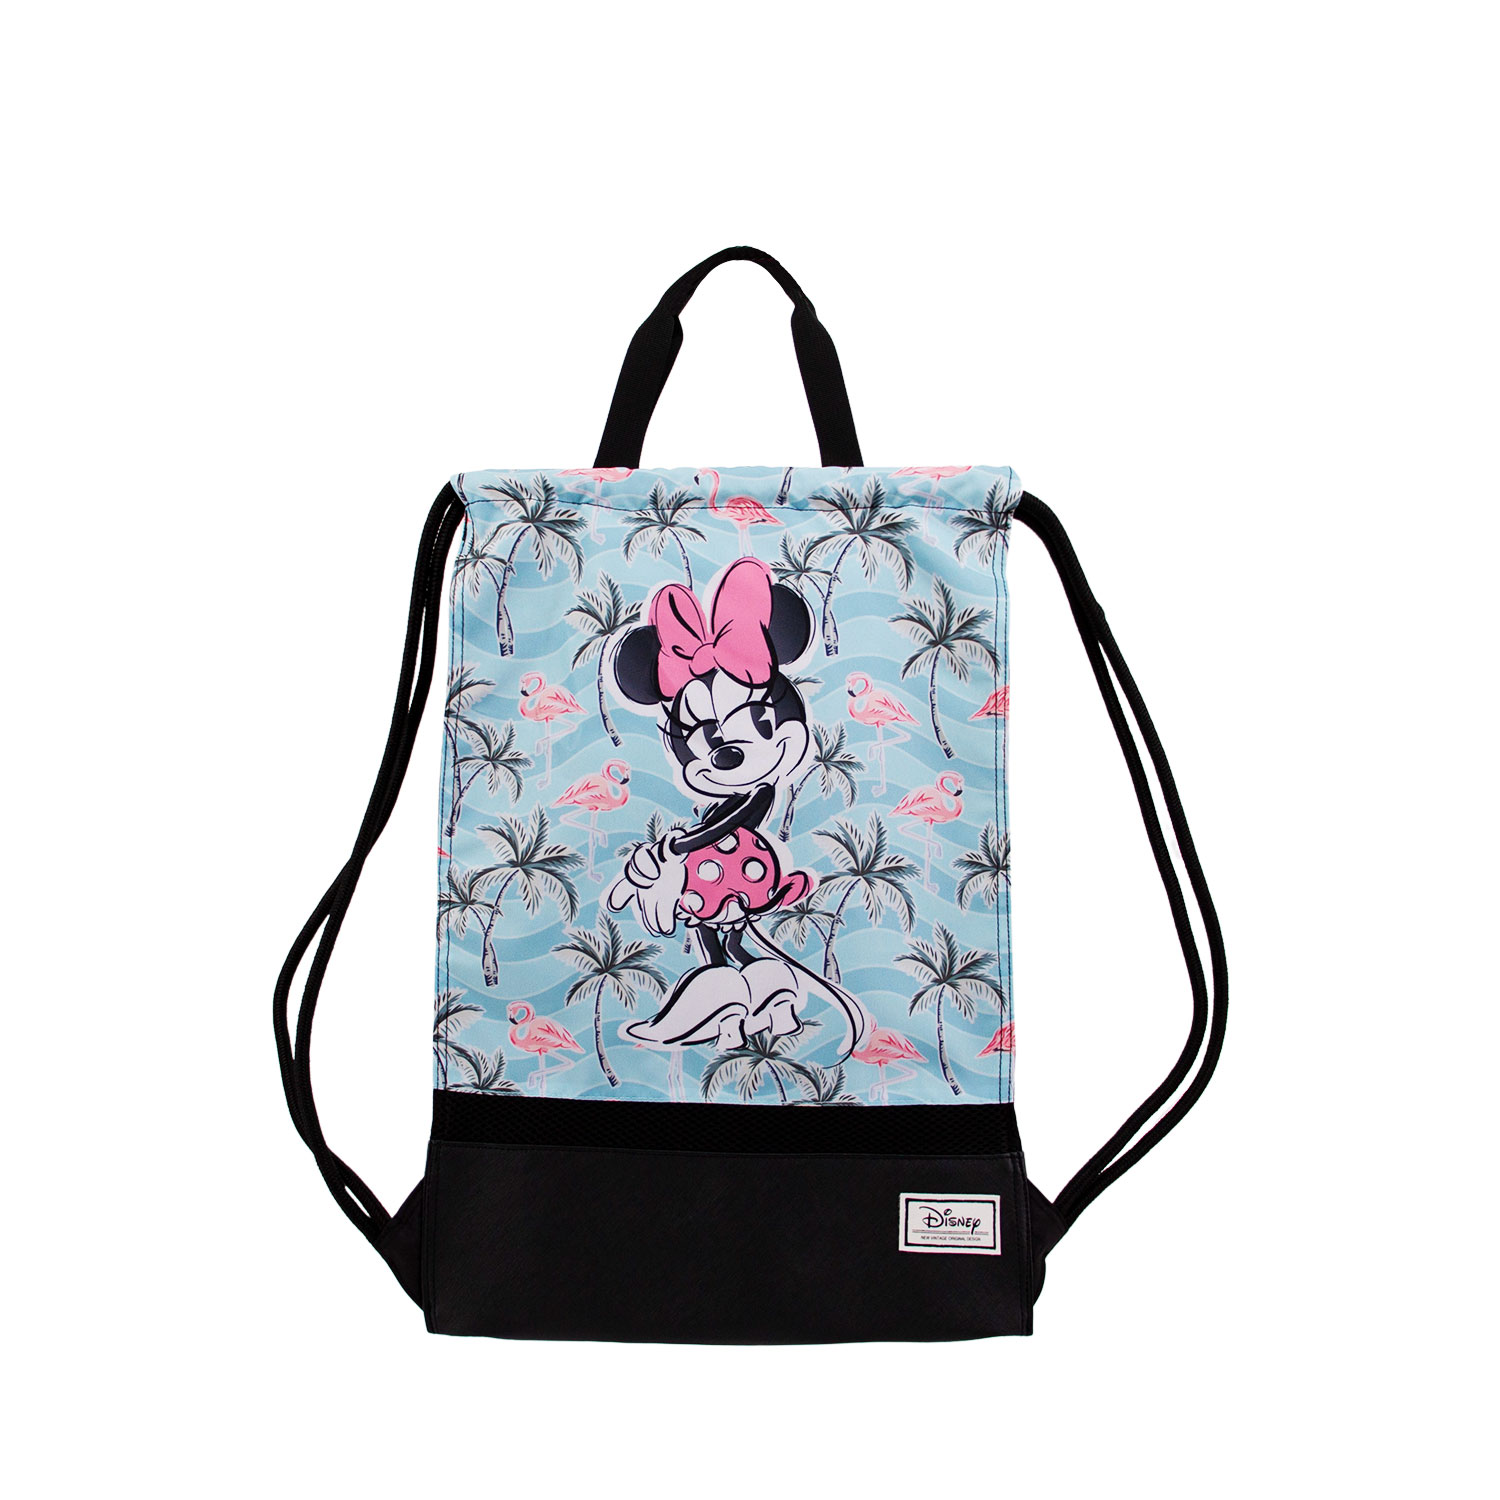 Storm Gymsack with Handles Minnie Mouse Tropic